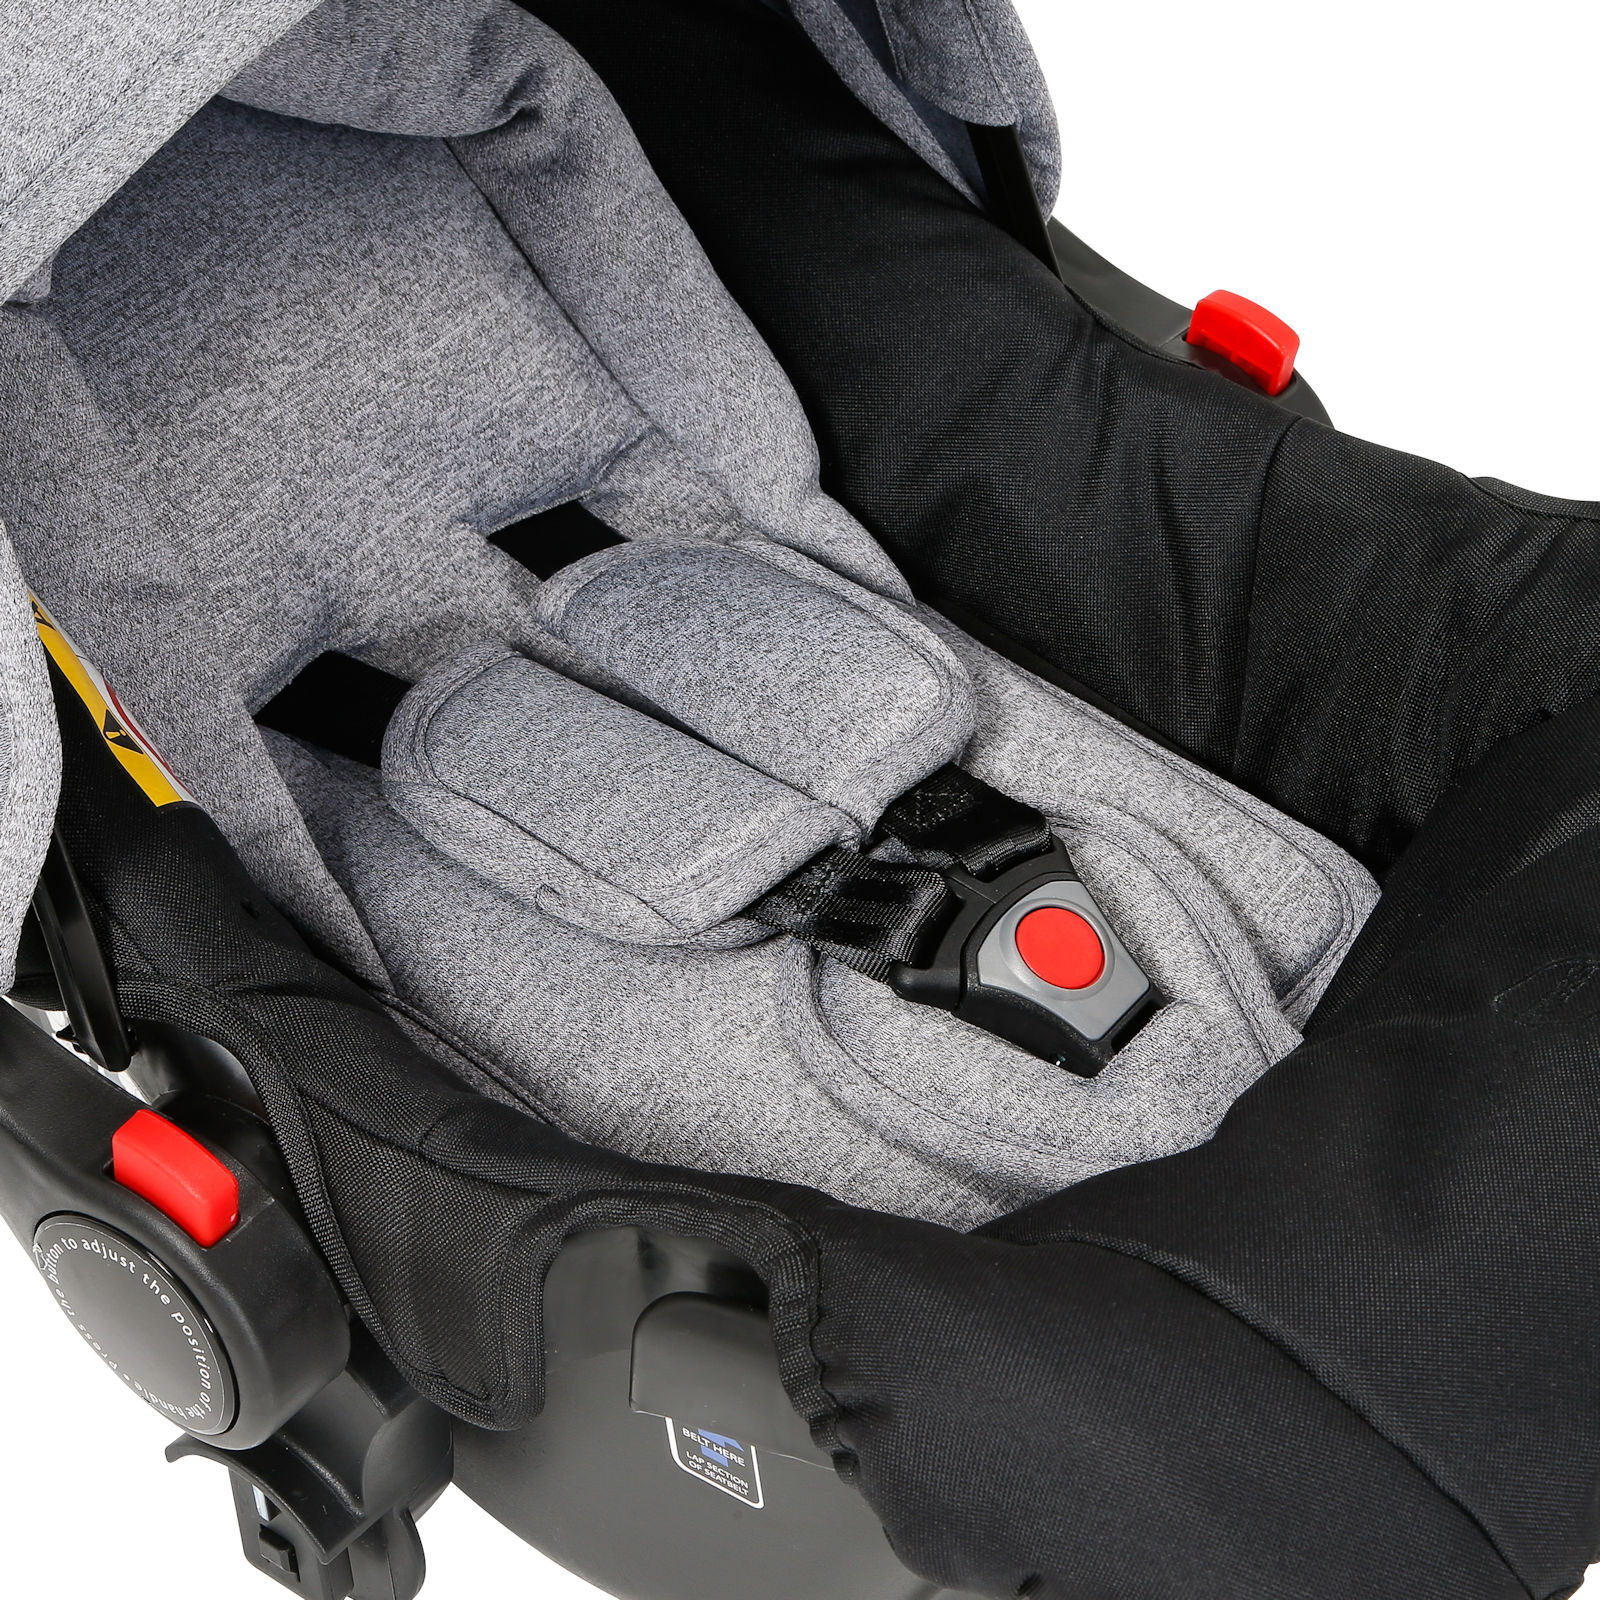 My Child Easy Twin Car Seat